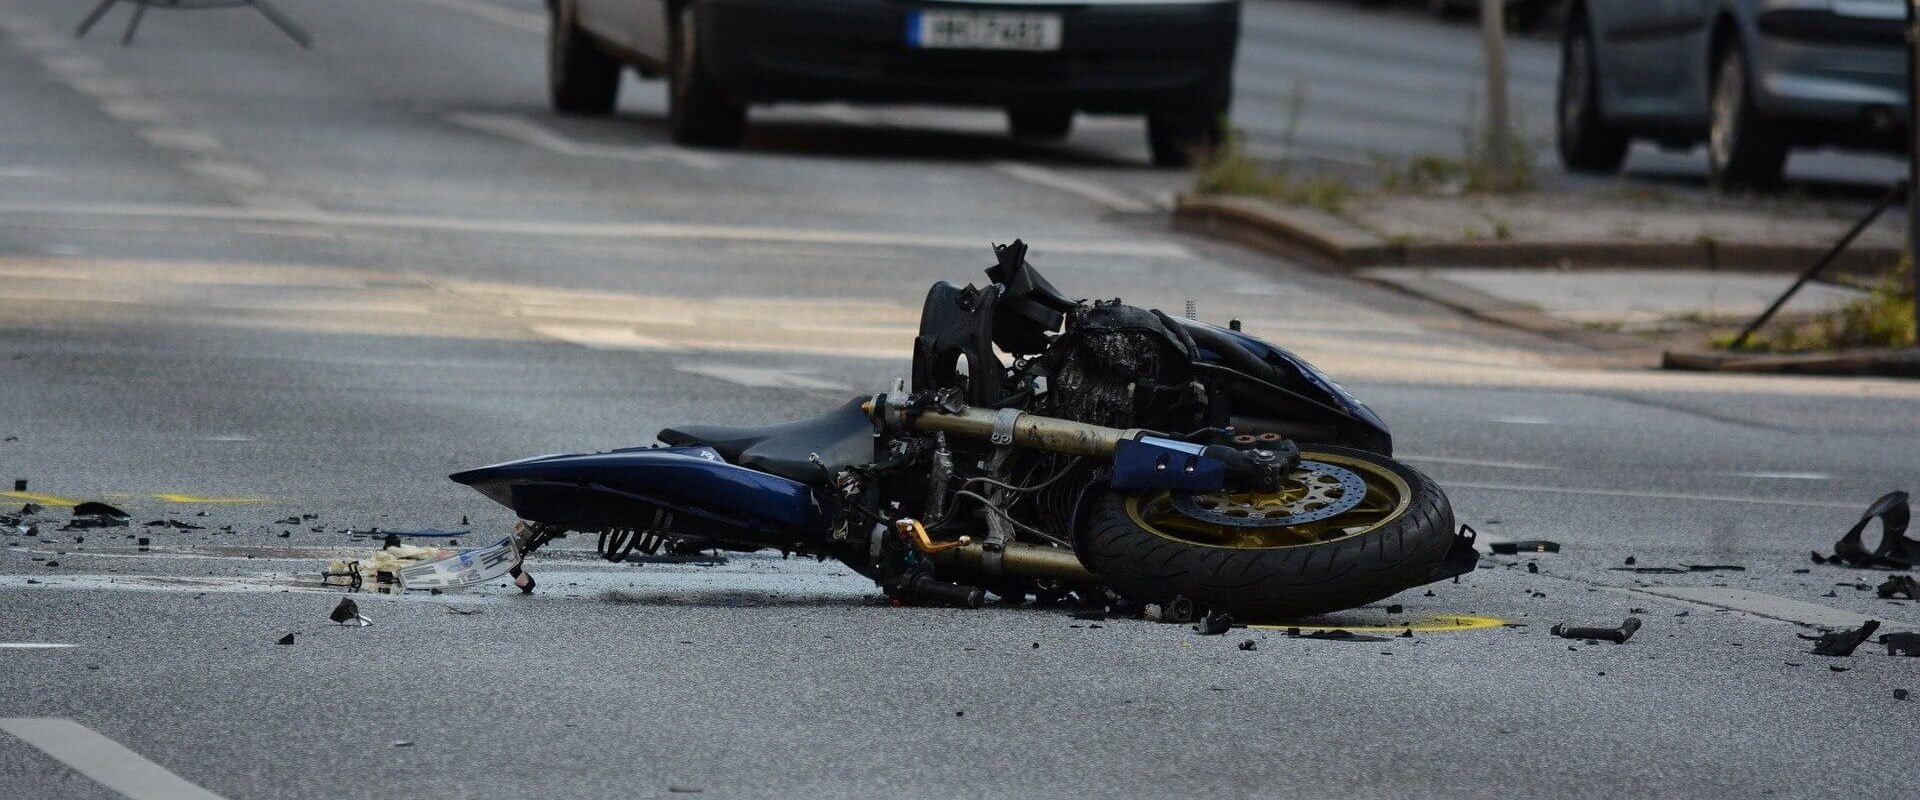 Who is at fault in most motorcycle accidents?